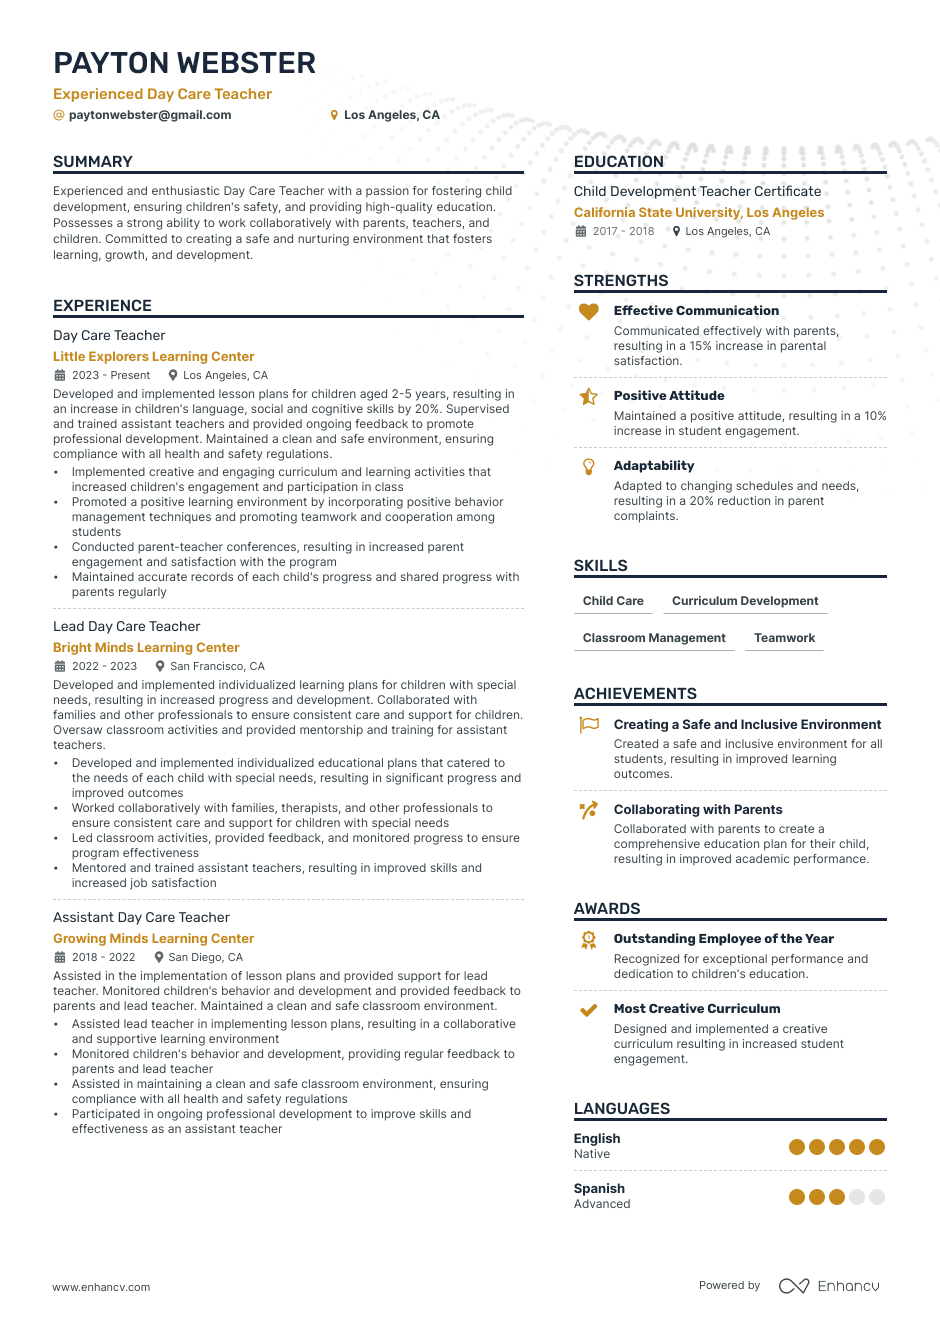 Experienced Day Care Teacher resume example